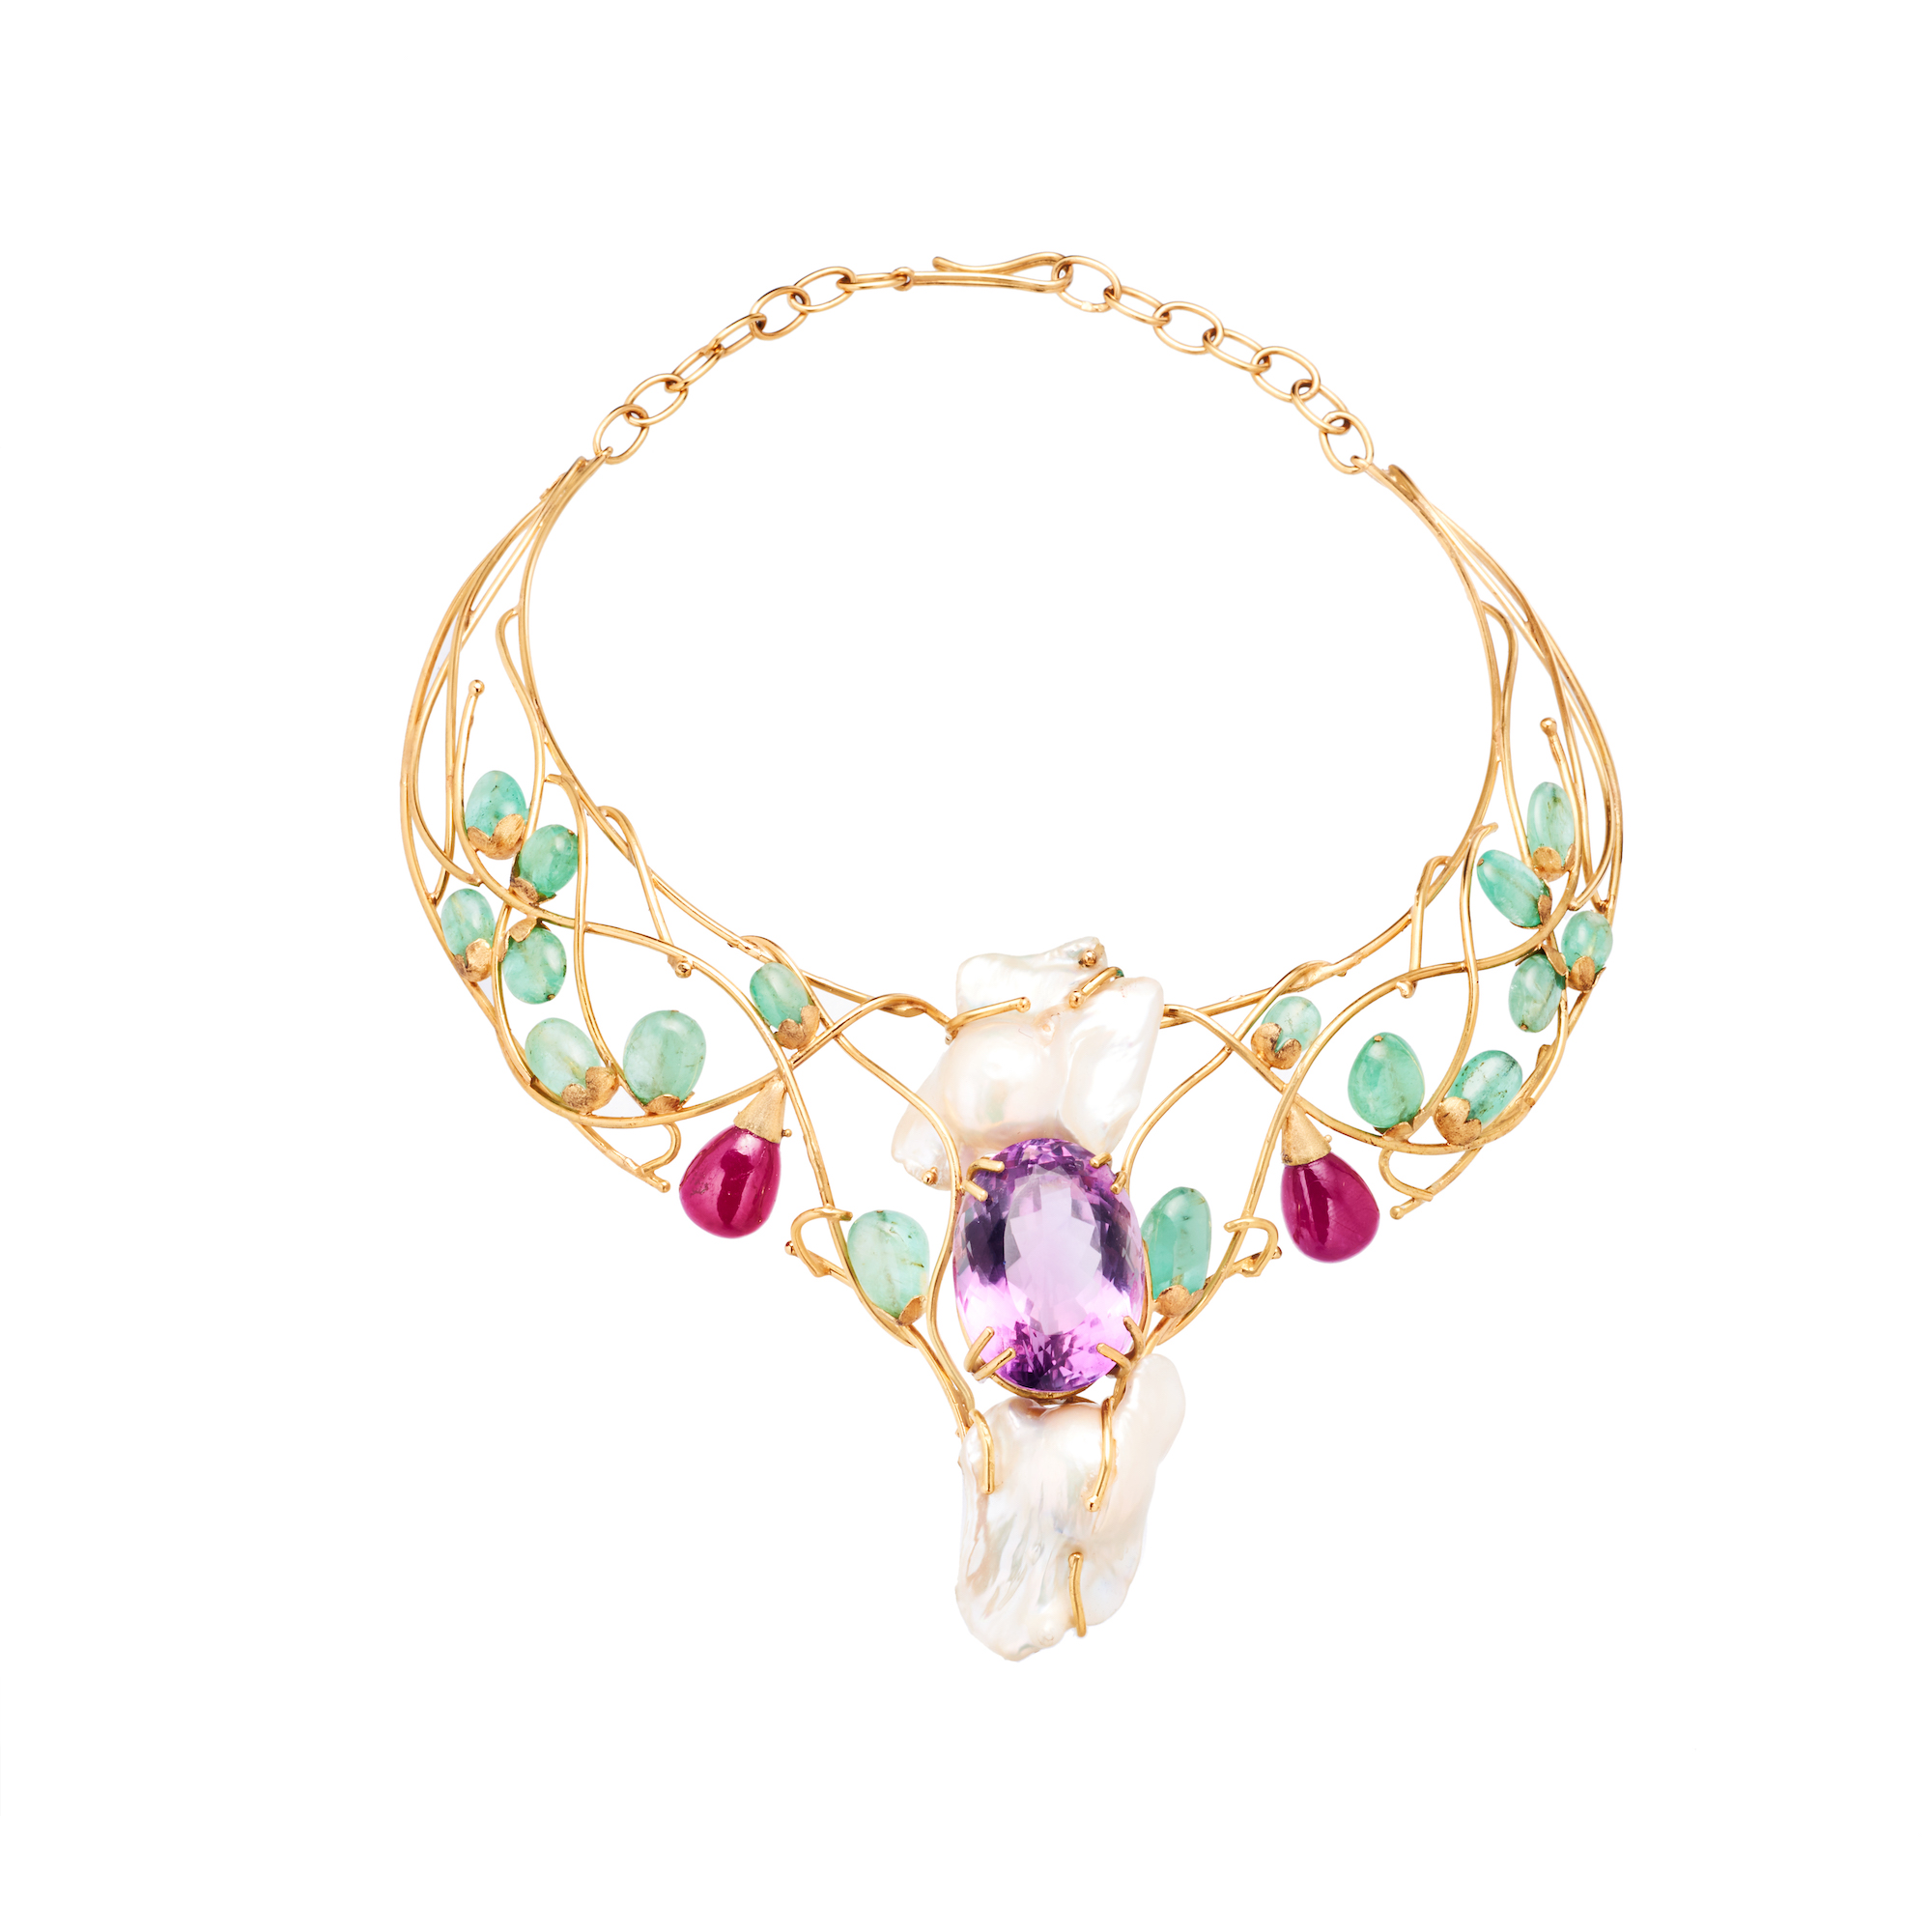 Sublime necklace, pearl, emerald, ruby, amethyst, yellow gold 19,25kt @Maria João Bahia